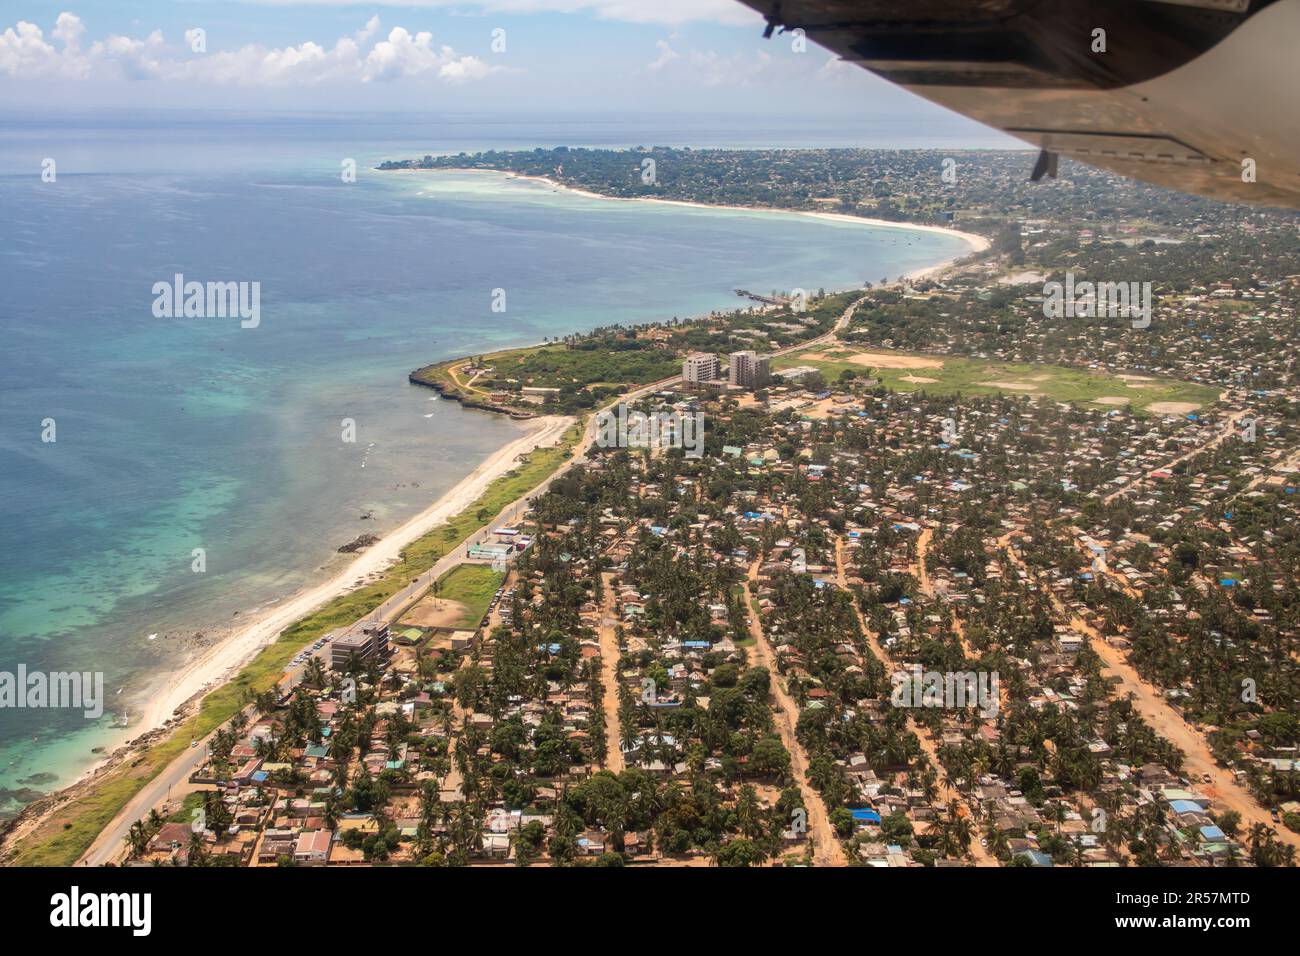 Pemba city, capital of Cabo Delgado province in Mozambique, picture taken from above before landing to Pemba airport Stock Photo